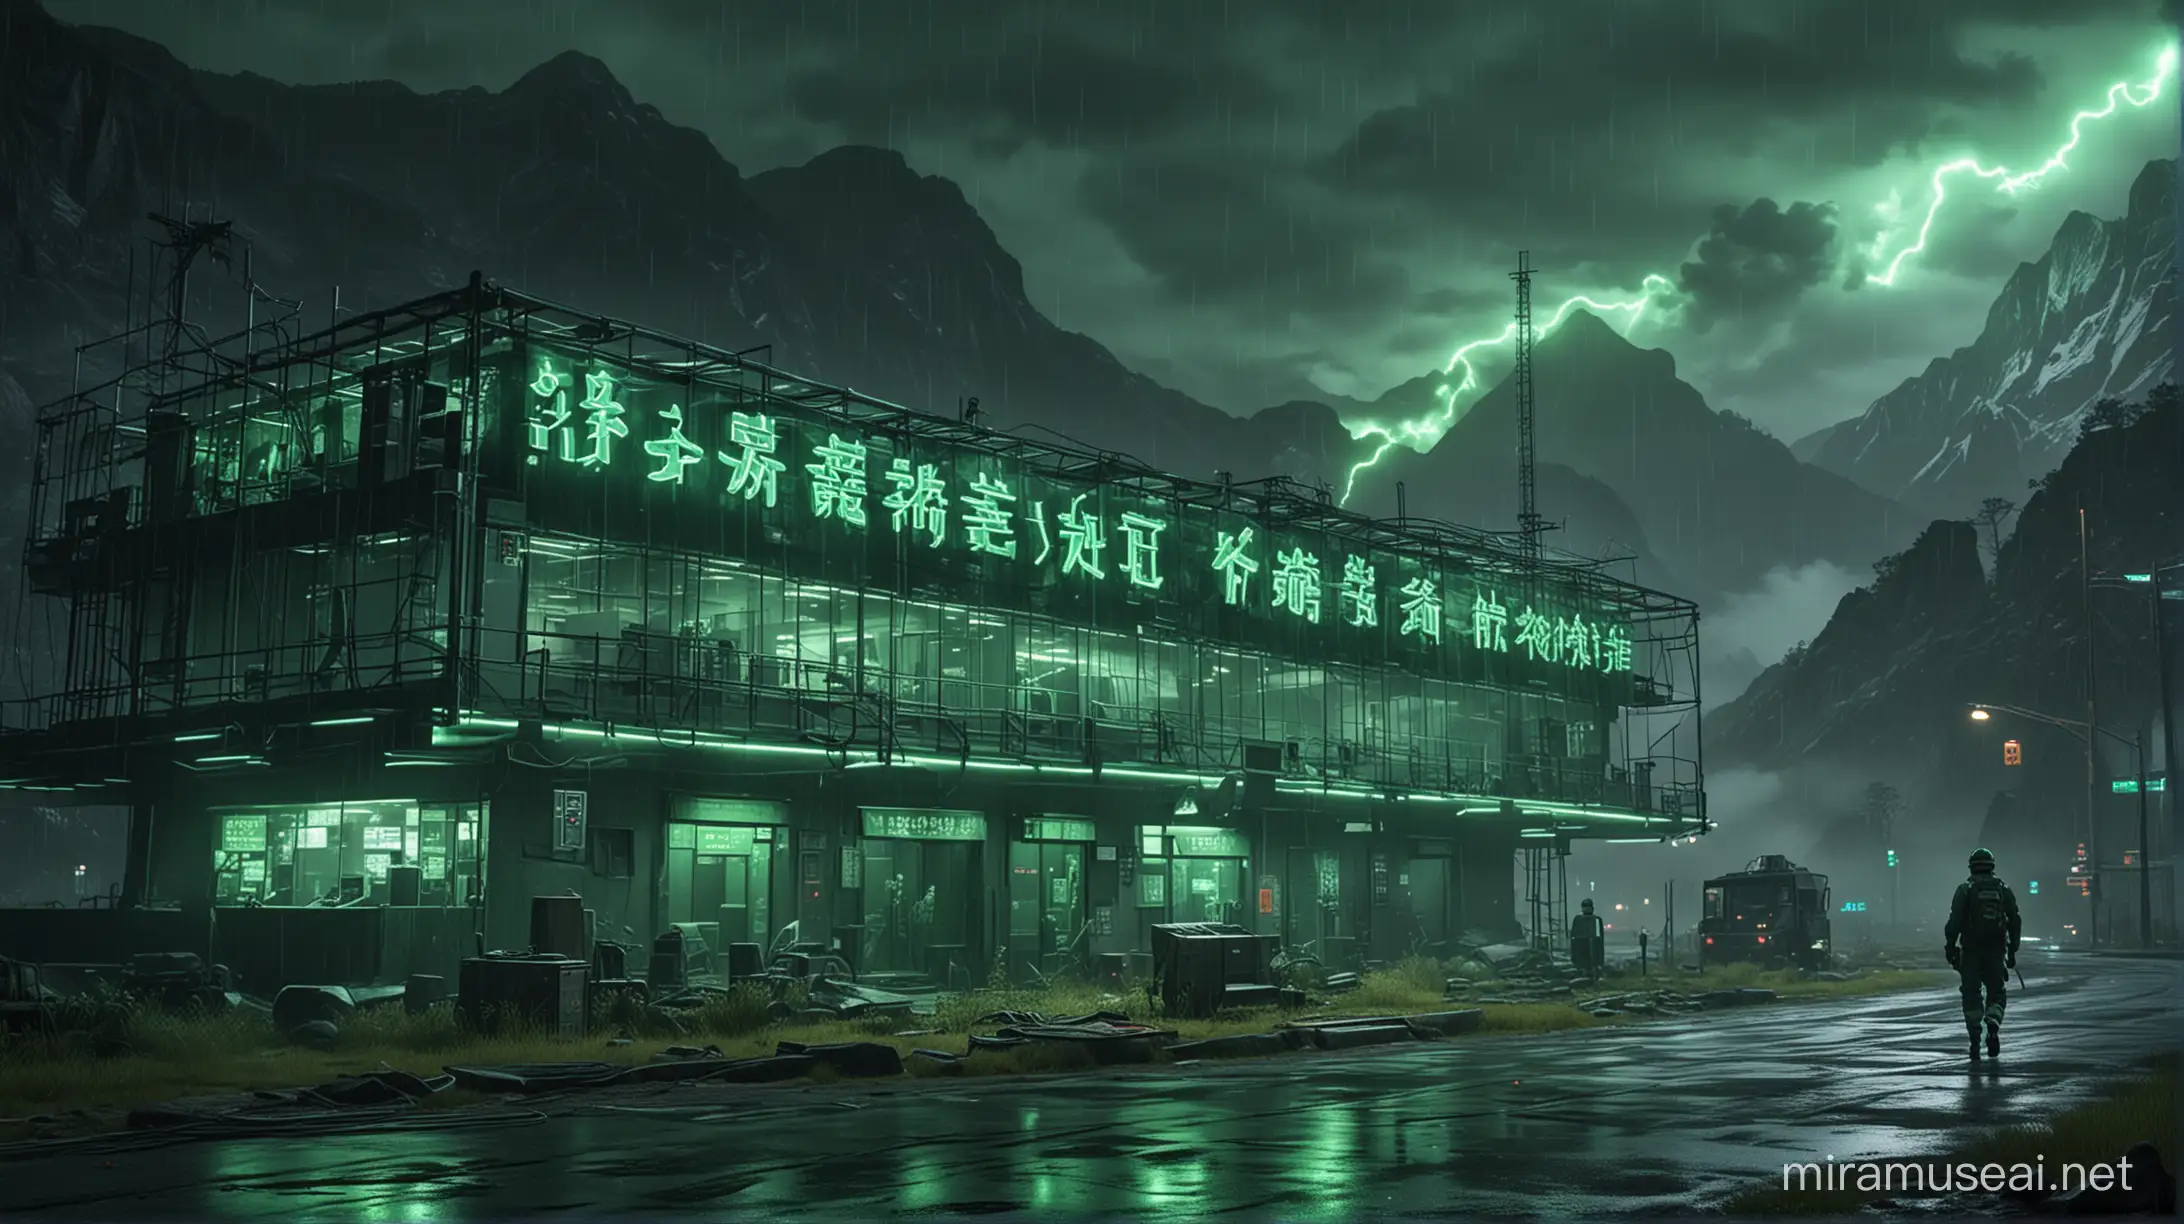 Realistic research centers buildings with one worker around it, green neon and huge neon lights inside the part, its color shadow on the floor, Rainy weather, staff in dark green uniforms and helmets, Atmospheric and cinematic, The huge structures, A dark green smoke rose from the research centers environment and spread in the air, The image space is outside the realistic research center.
with huge satellite antennas,
A huge cubic green neon object,
in the Realistic mountains.
atmospheric and cinematic.
All overall dark green image theme.
Very big lights and lots of green neon lights.
The neon lights in the image should be very bright throughout the image.
The neon lights in the picture should be very bright in the dark
The neon lights in the picture should be very bright.
Very large and bright neon lamps in the structure.
Shades of green throughout the image.
3D.
Several large advanced and strange buildings nearby.
With large Japanese inscriptions on the structure.